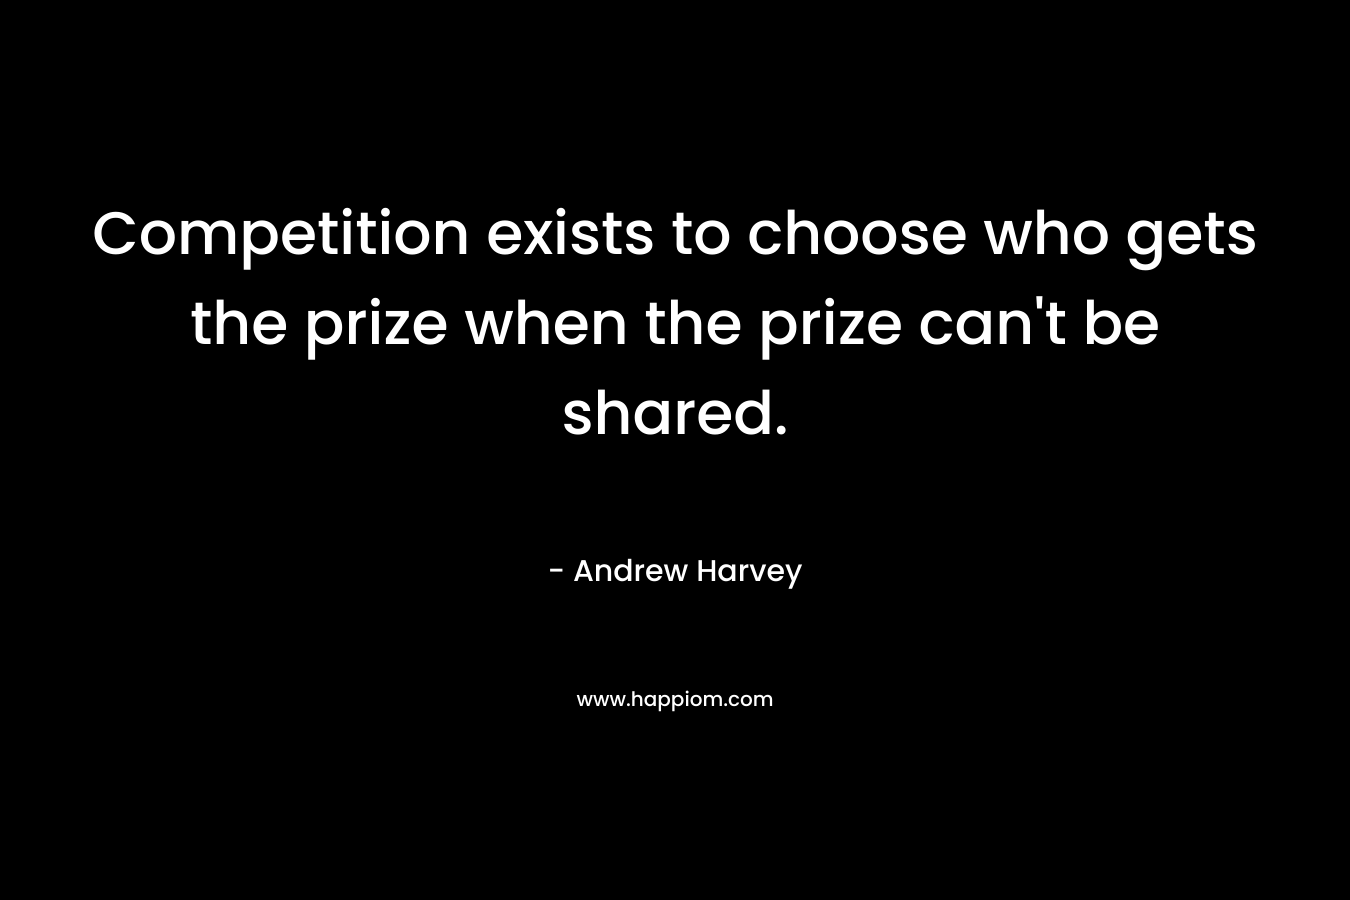 Competition exists to choose who gets the prize when the prize can't be shared.